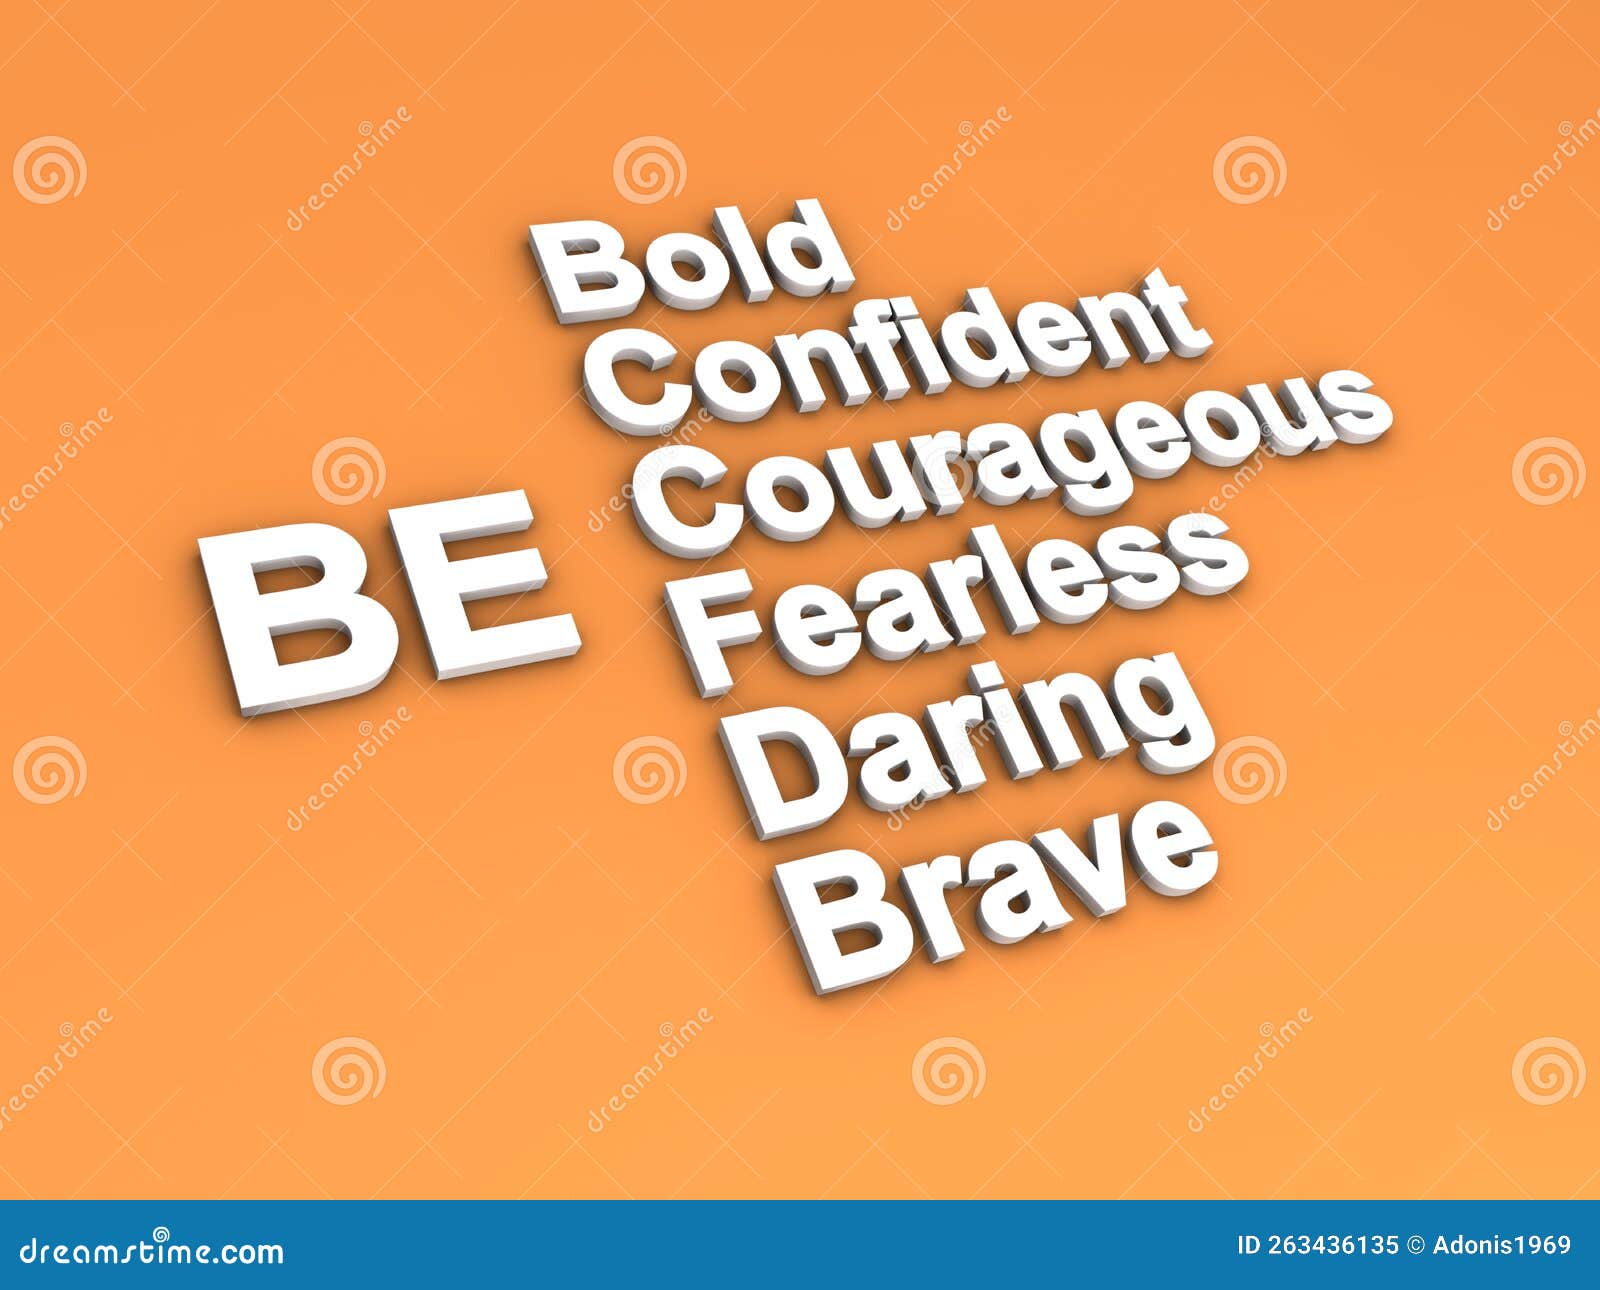 be bold be confident be courageous... word